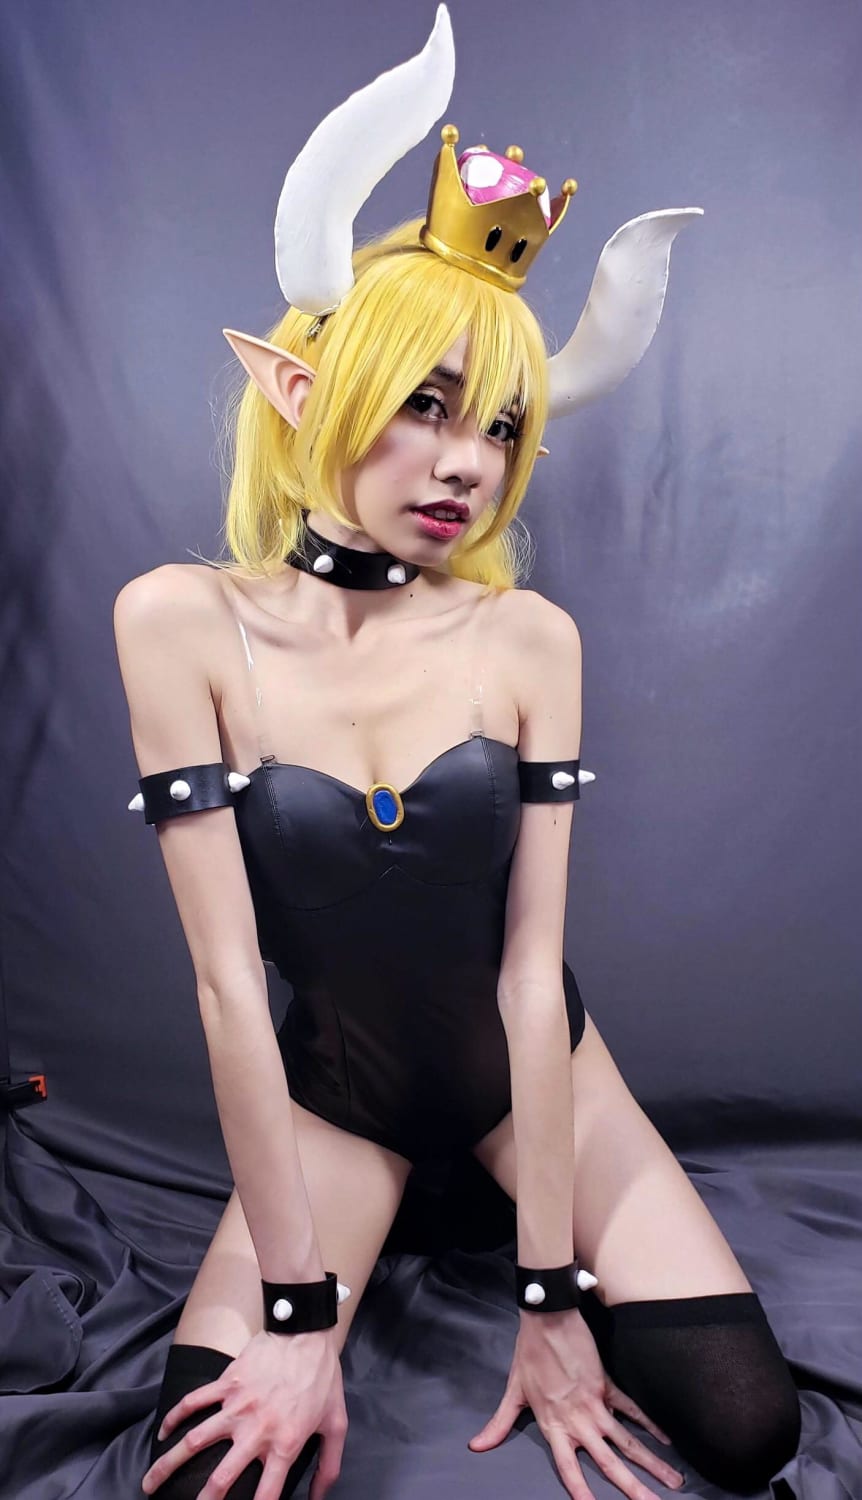 [Self] My Bowsette cosplay. I’m 2 years too late for this meme